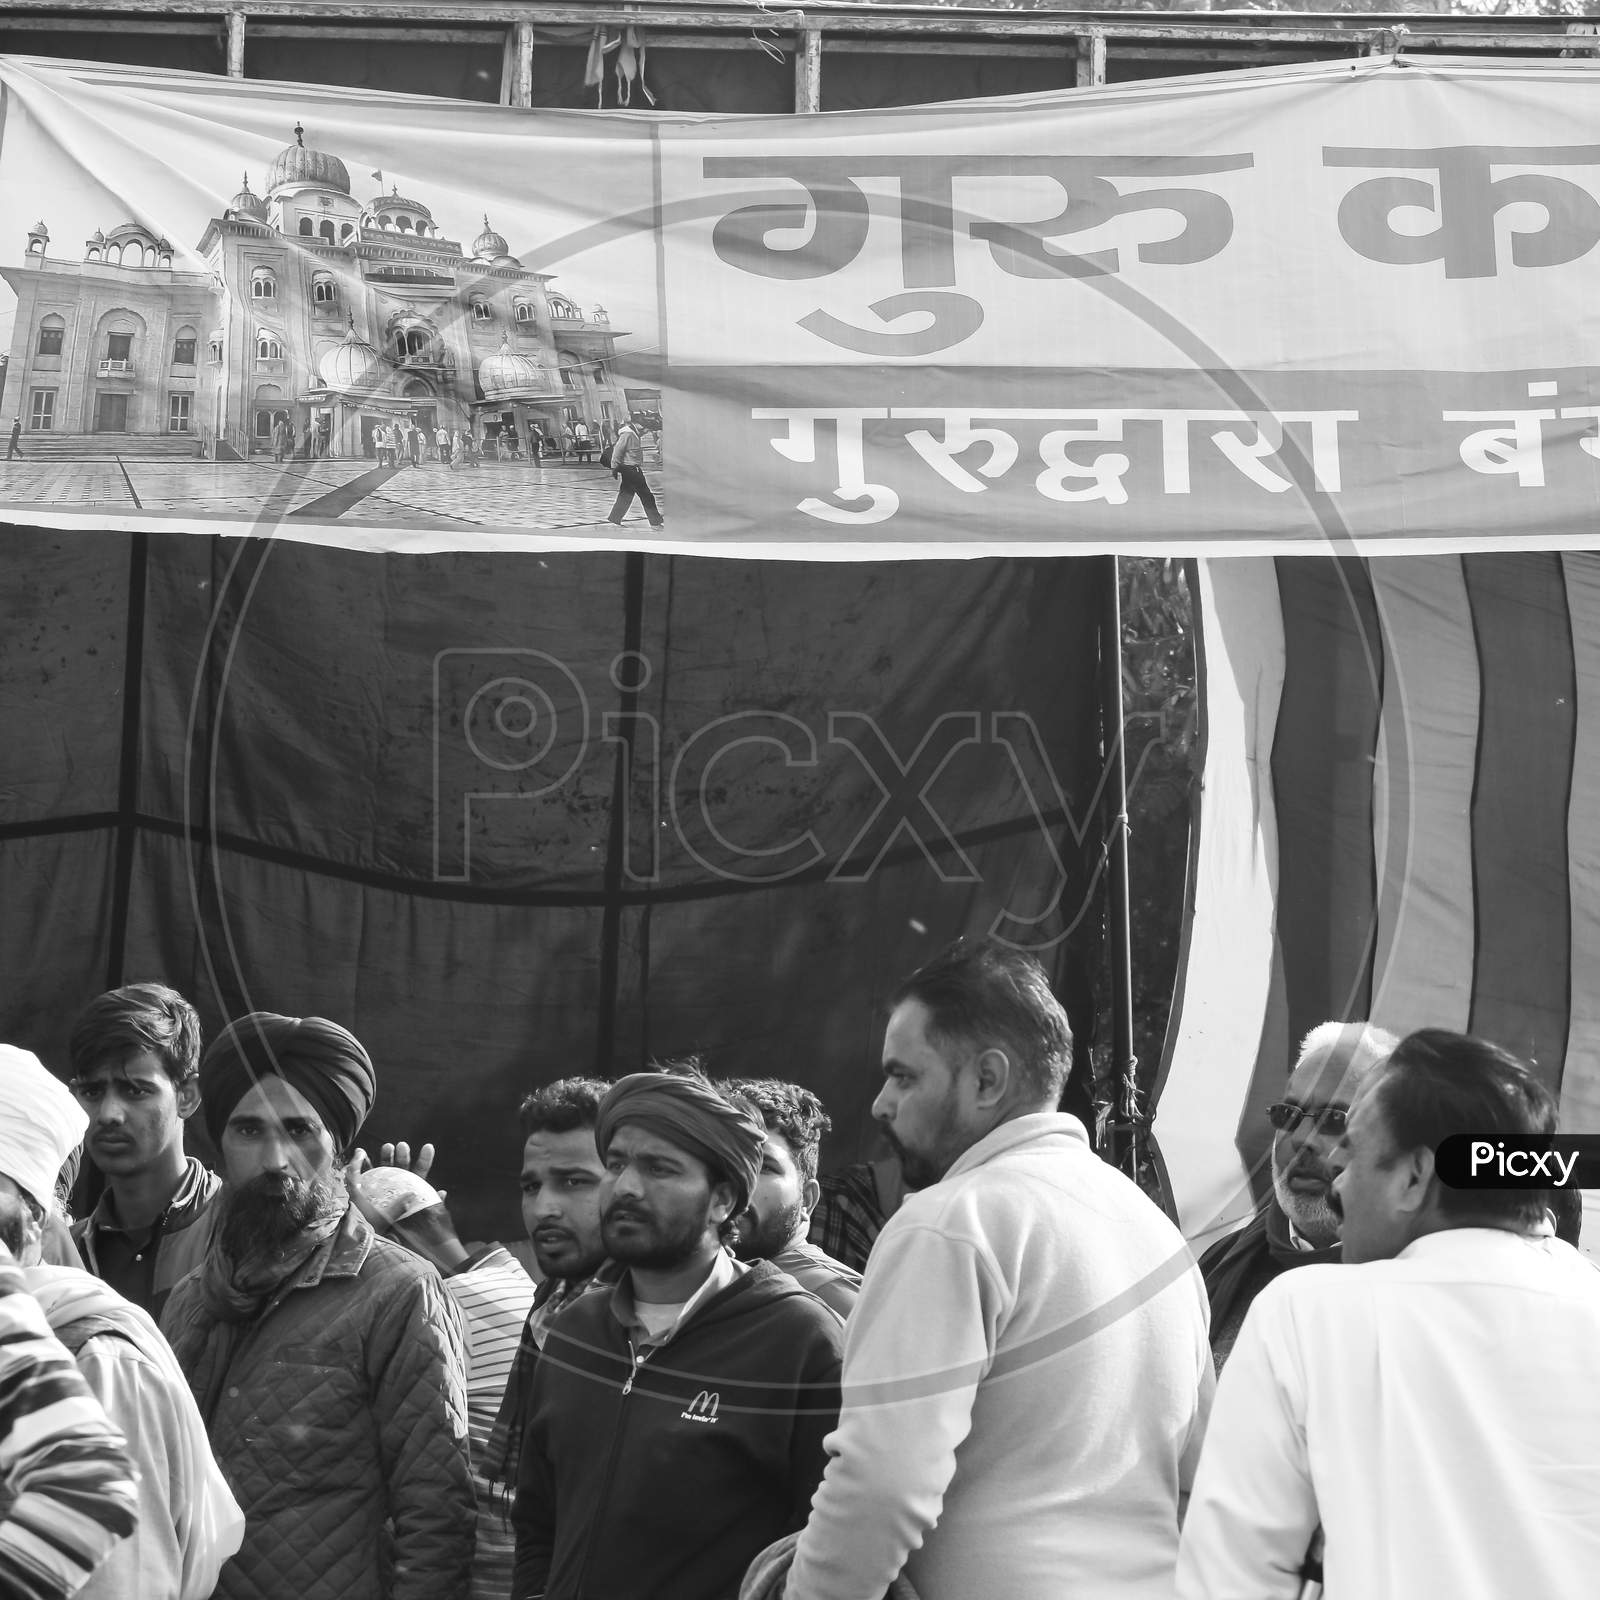 New Delhi, India – December 25 2020 : Indian Sikh & Hindu Farmers From Punjab, Uttar Pradesh And Uttarakhand States Protests At Delhi-Up Border. Farmers Are Protesting Against The New Farmer Laws